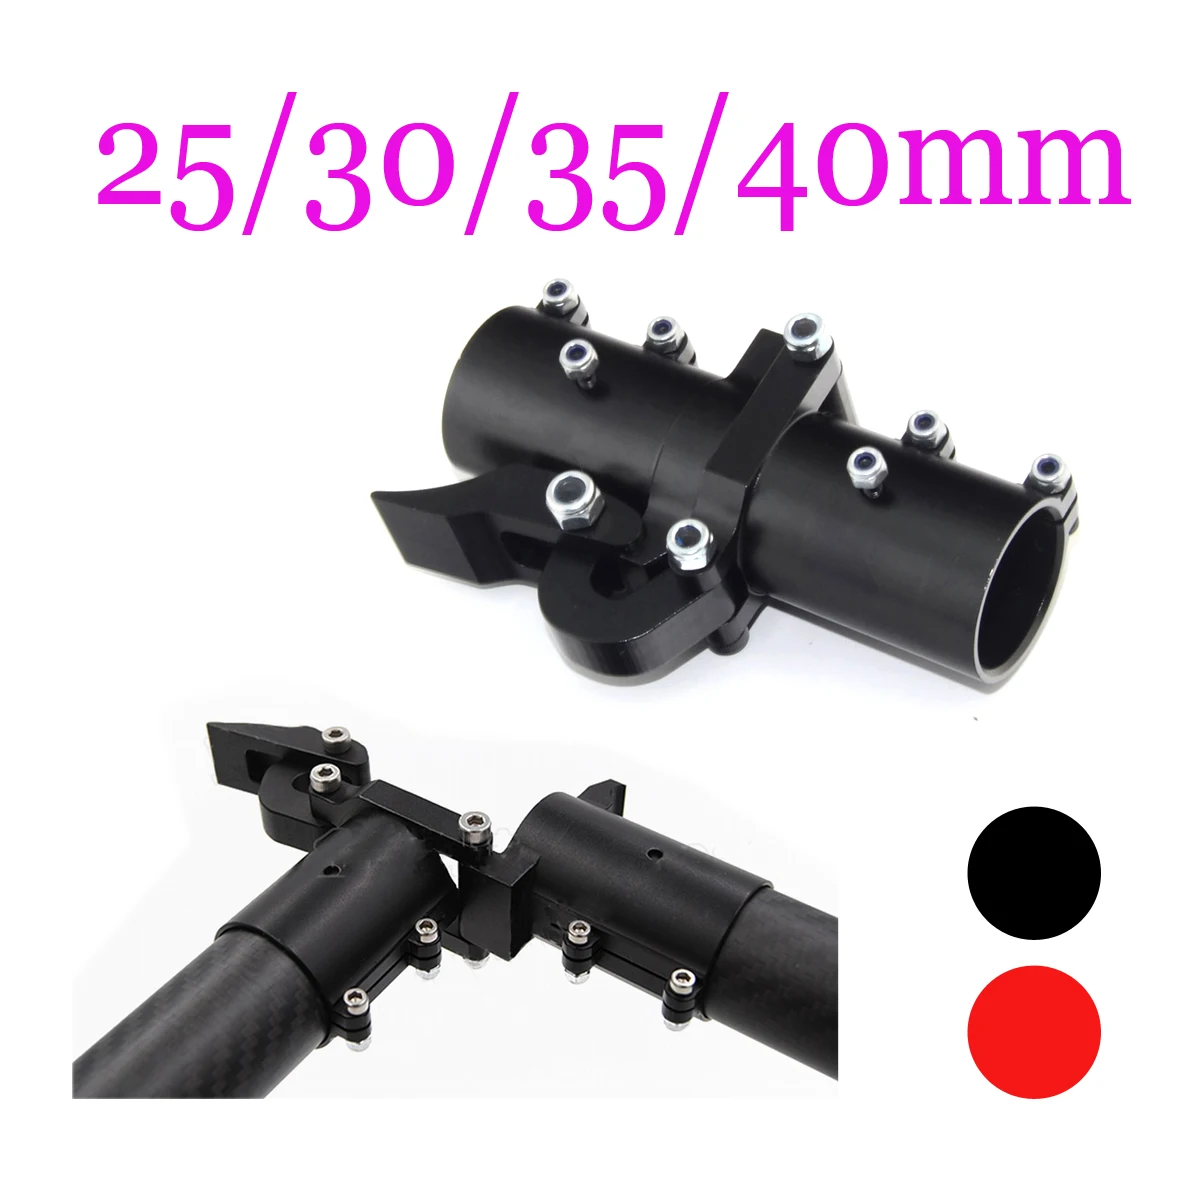 

25mm 30mm 35mm 40mm Pipe Union Joint Connection Lateral Folding Arm for DIY RC Quadcopter Multicopter Plant Protection UAV Drone